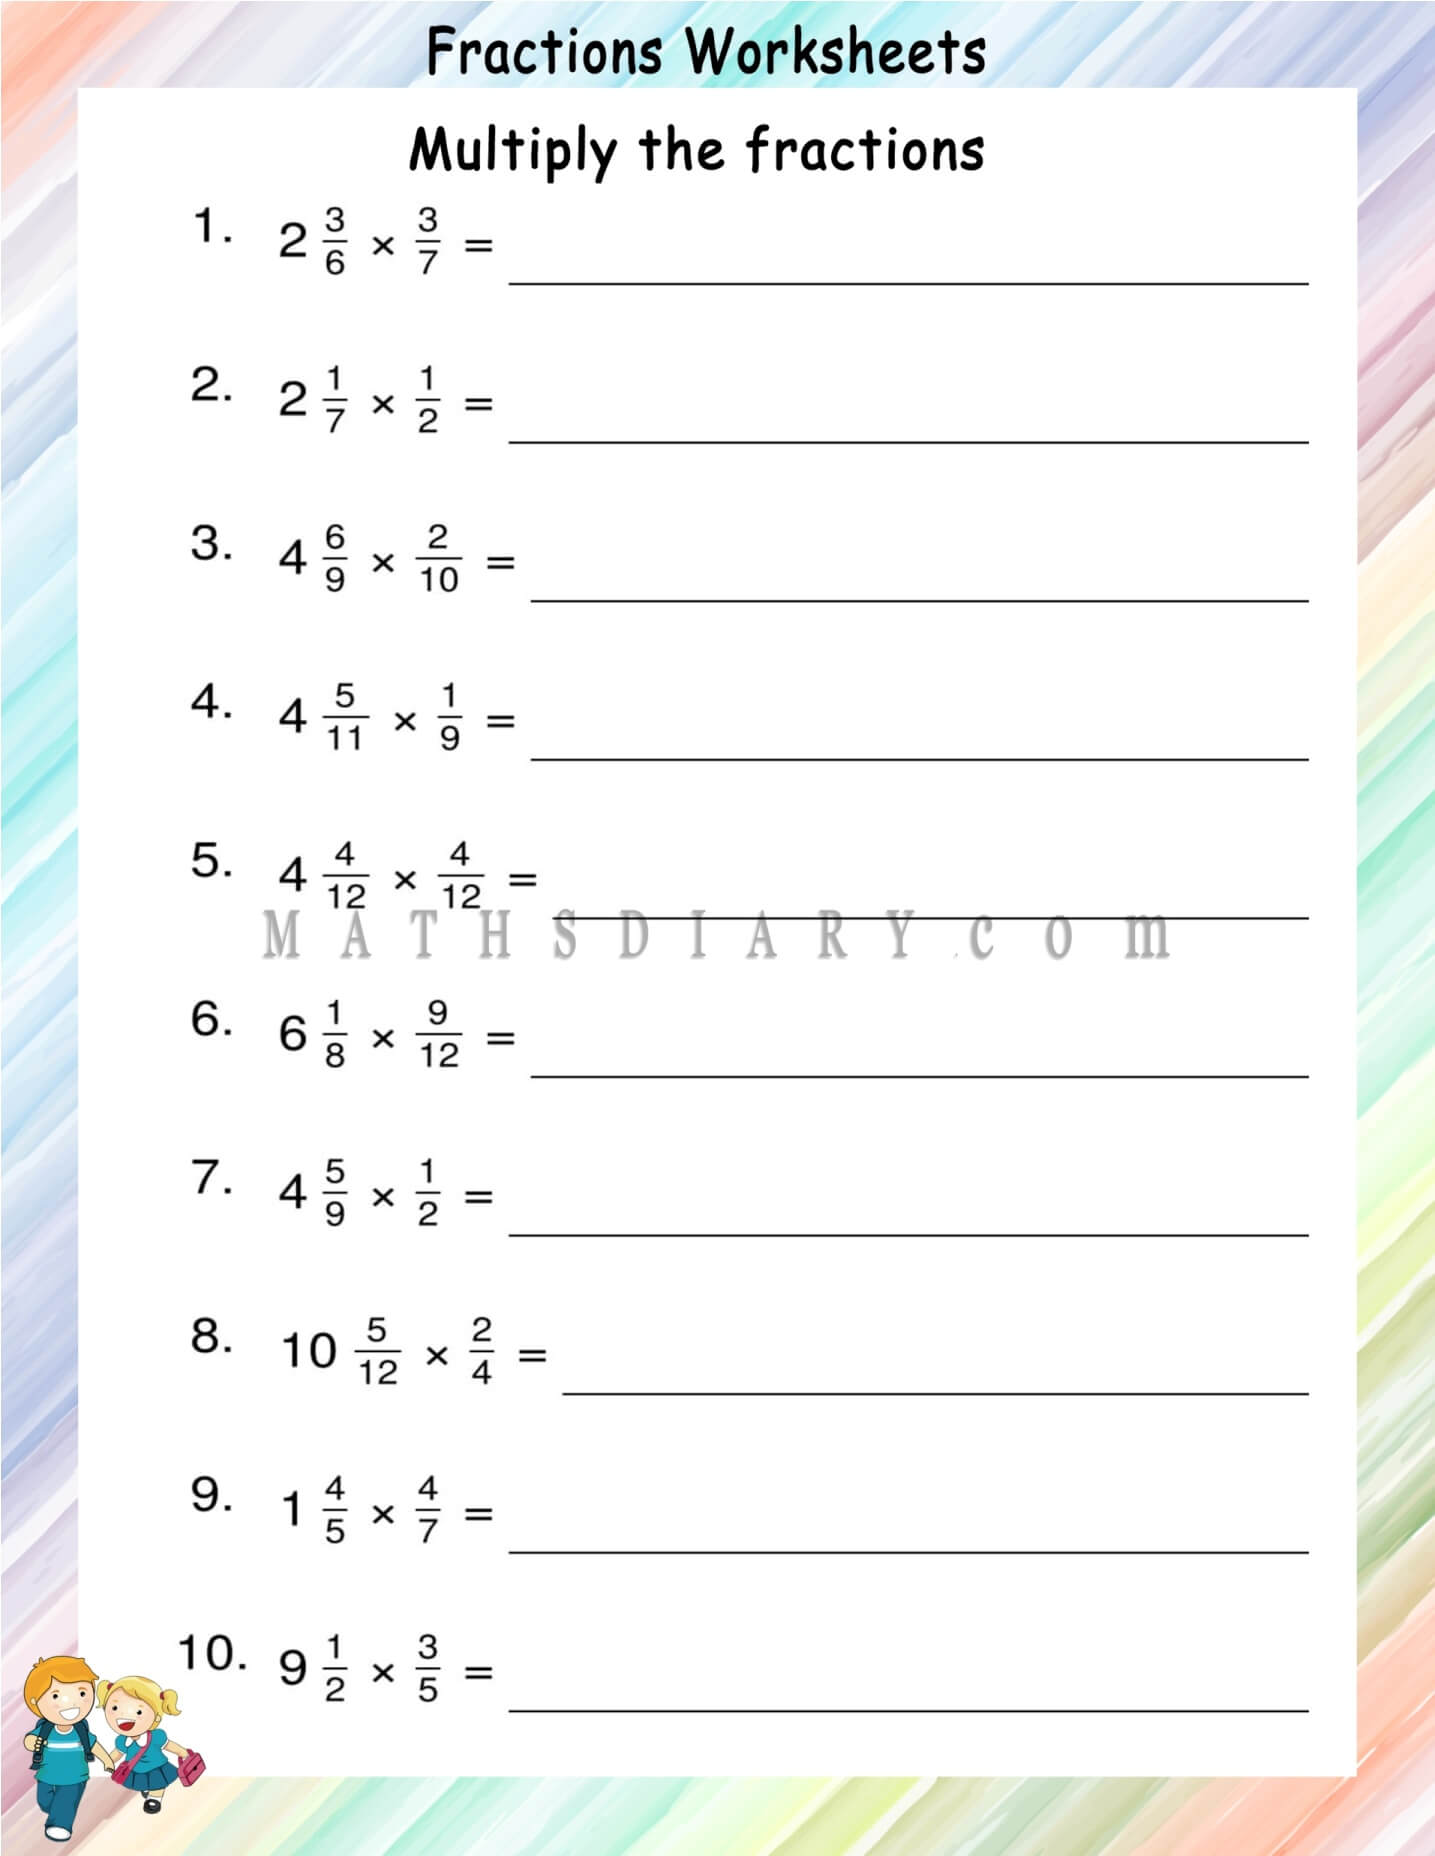 Multiplying Mixed Fractions By Proper Fractions Worksheets Math Worksheets MathsDiary